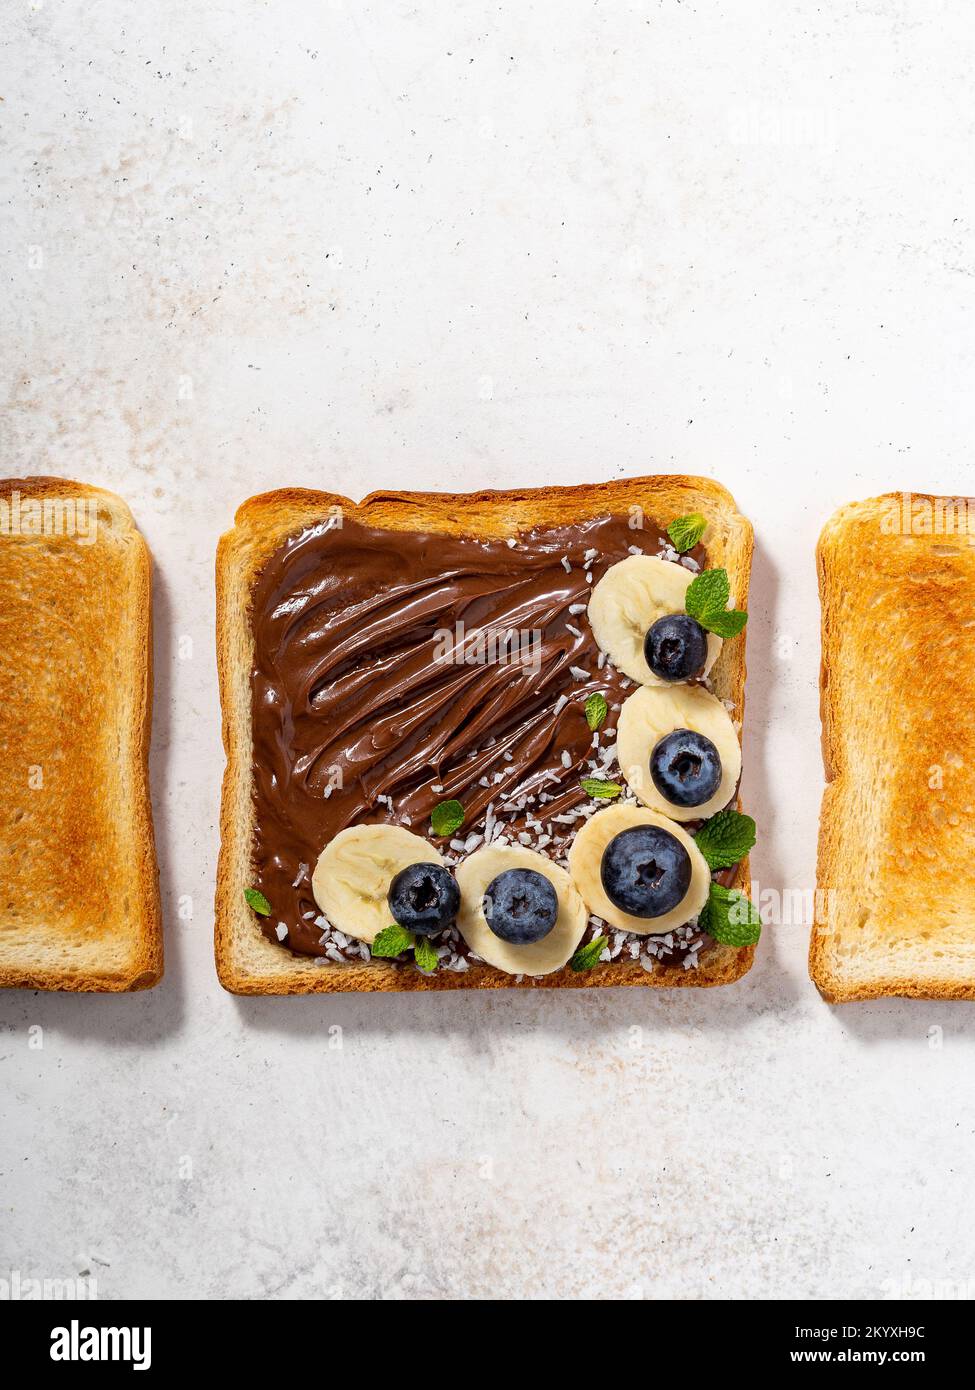 Overhead shot of a wheat bread with chocolate spread, banana slices and berries on it Stock Photo